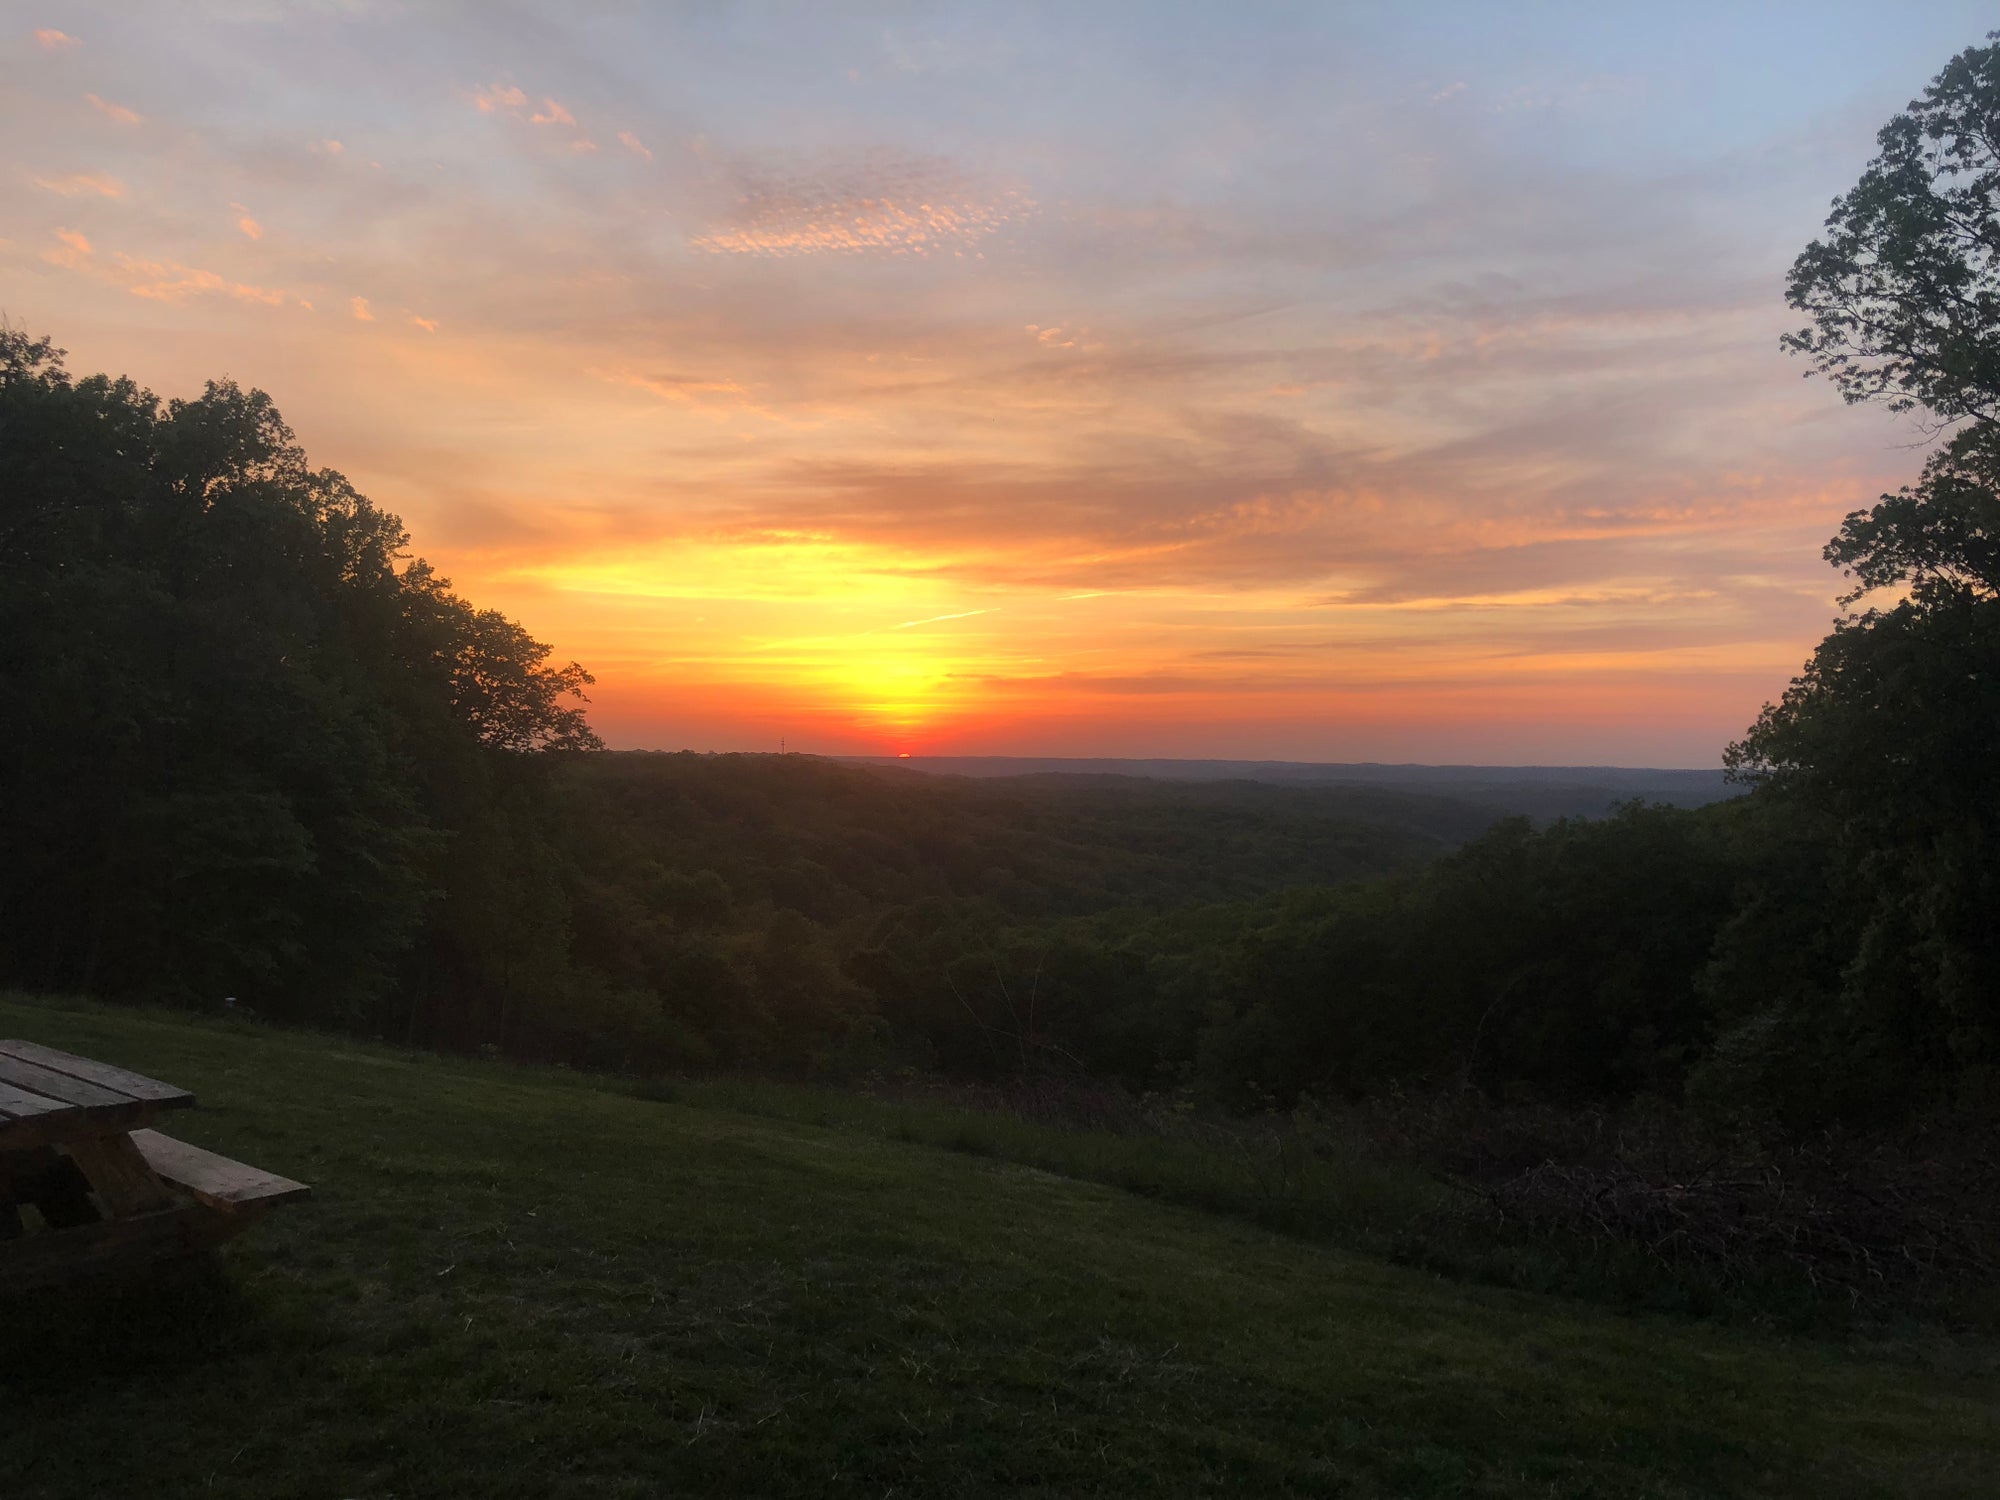 A sunset at Brown County State Park